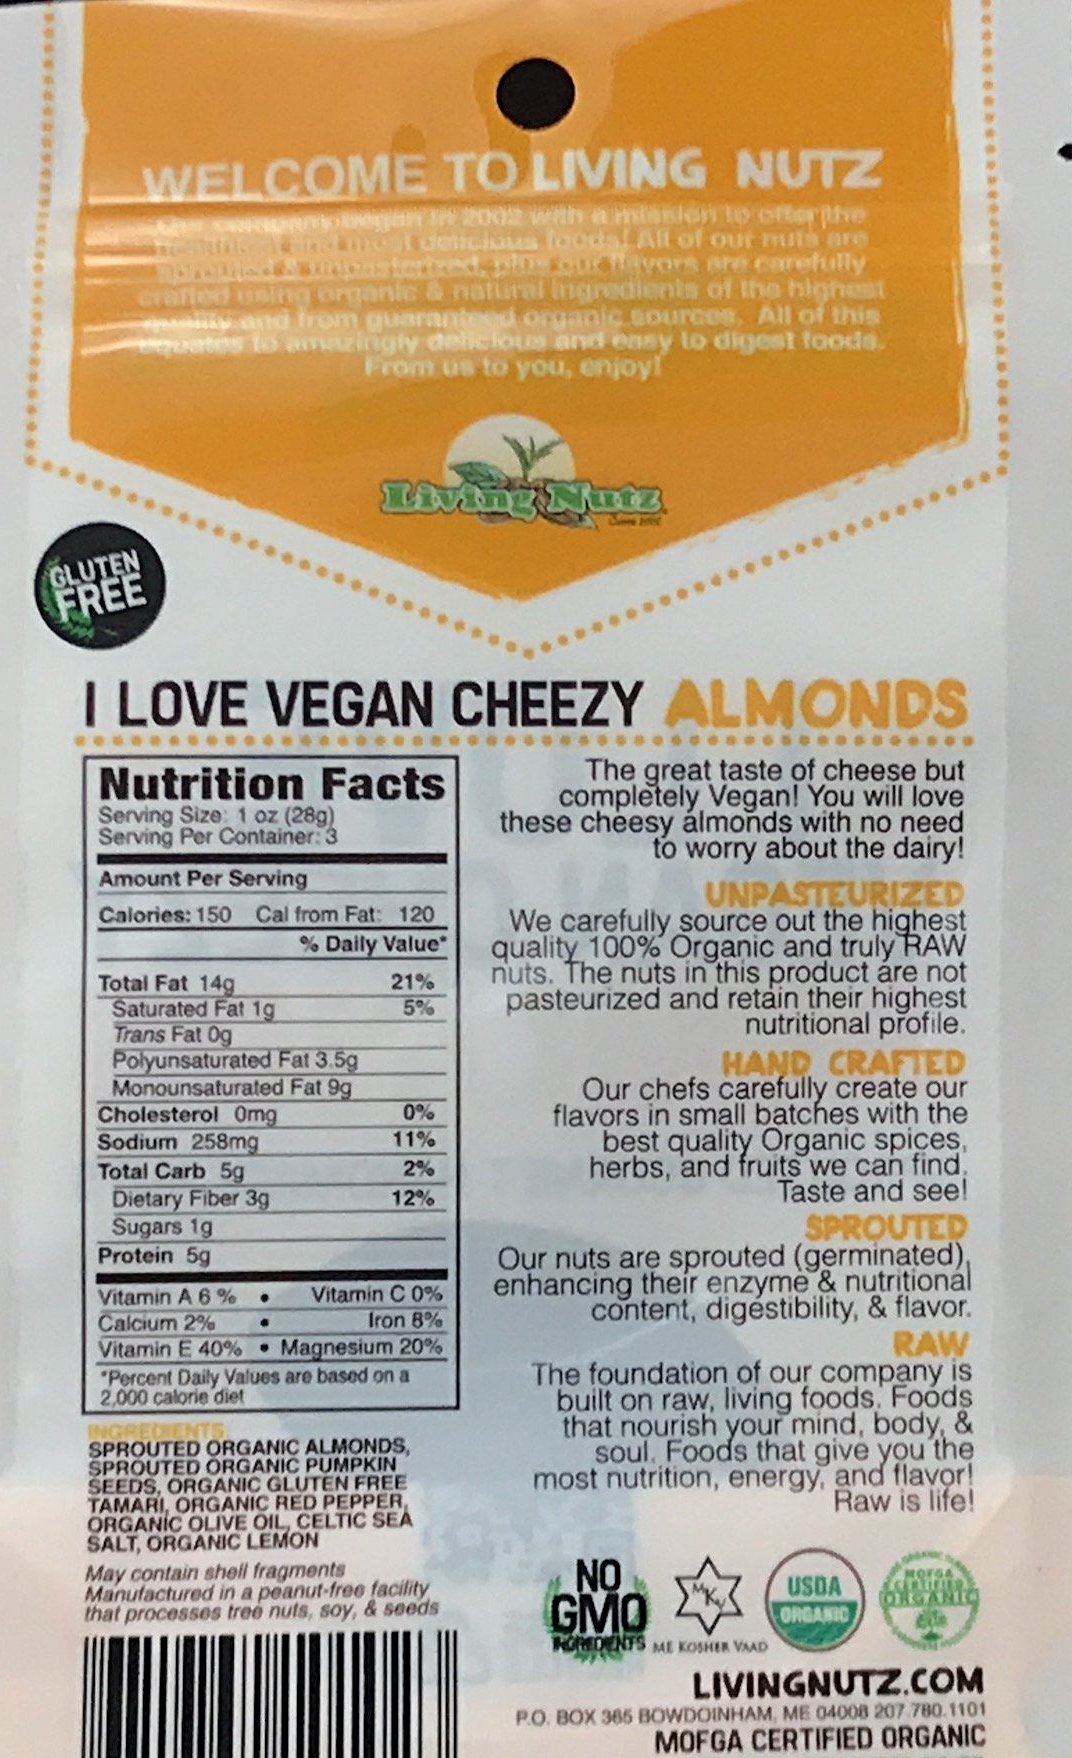 Organic sprouted nuts.  Raw &amp; unpasteurized almonds vegan cheesy flavor. Living Nutz nut snacks